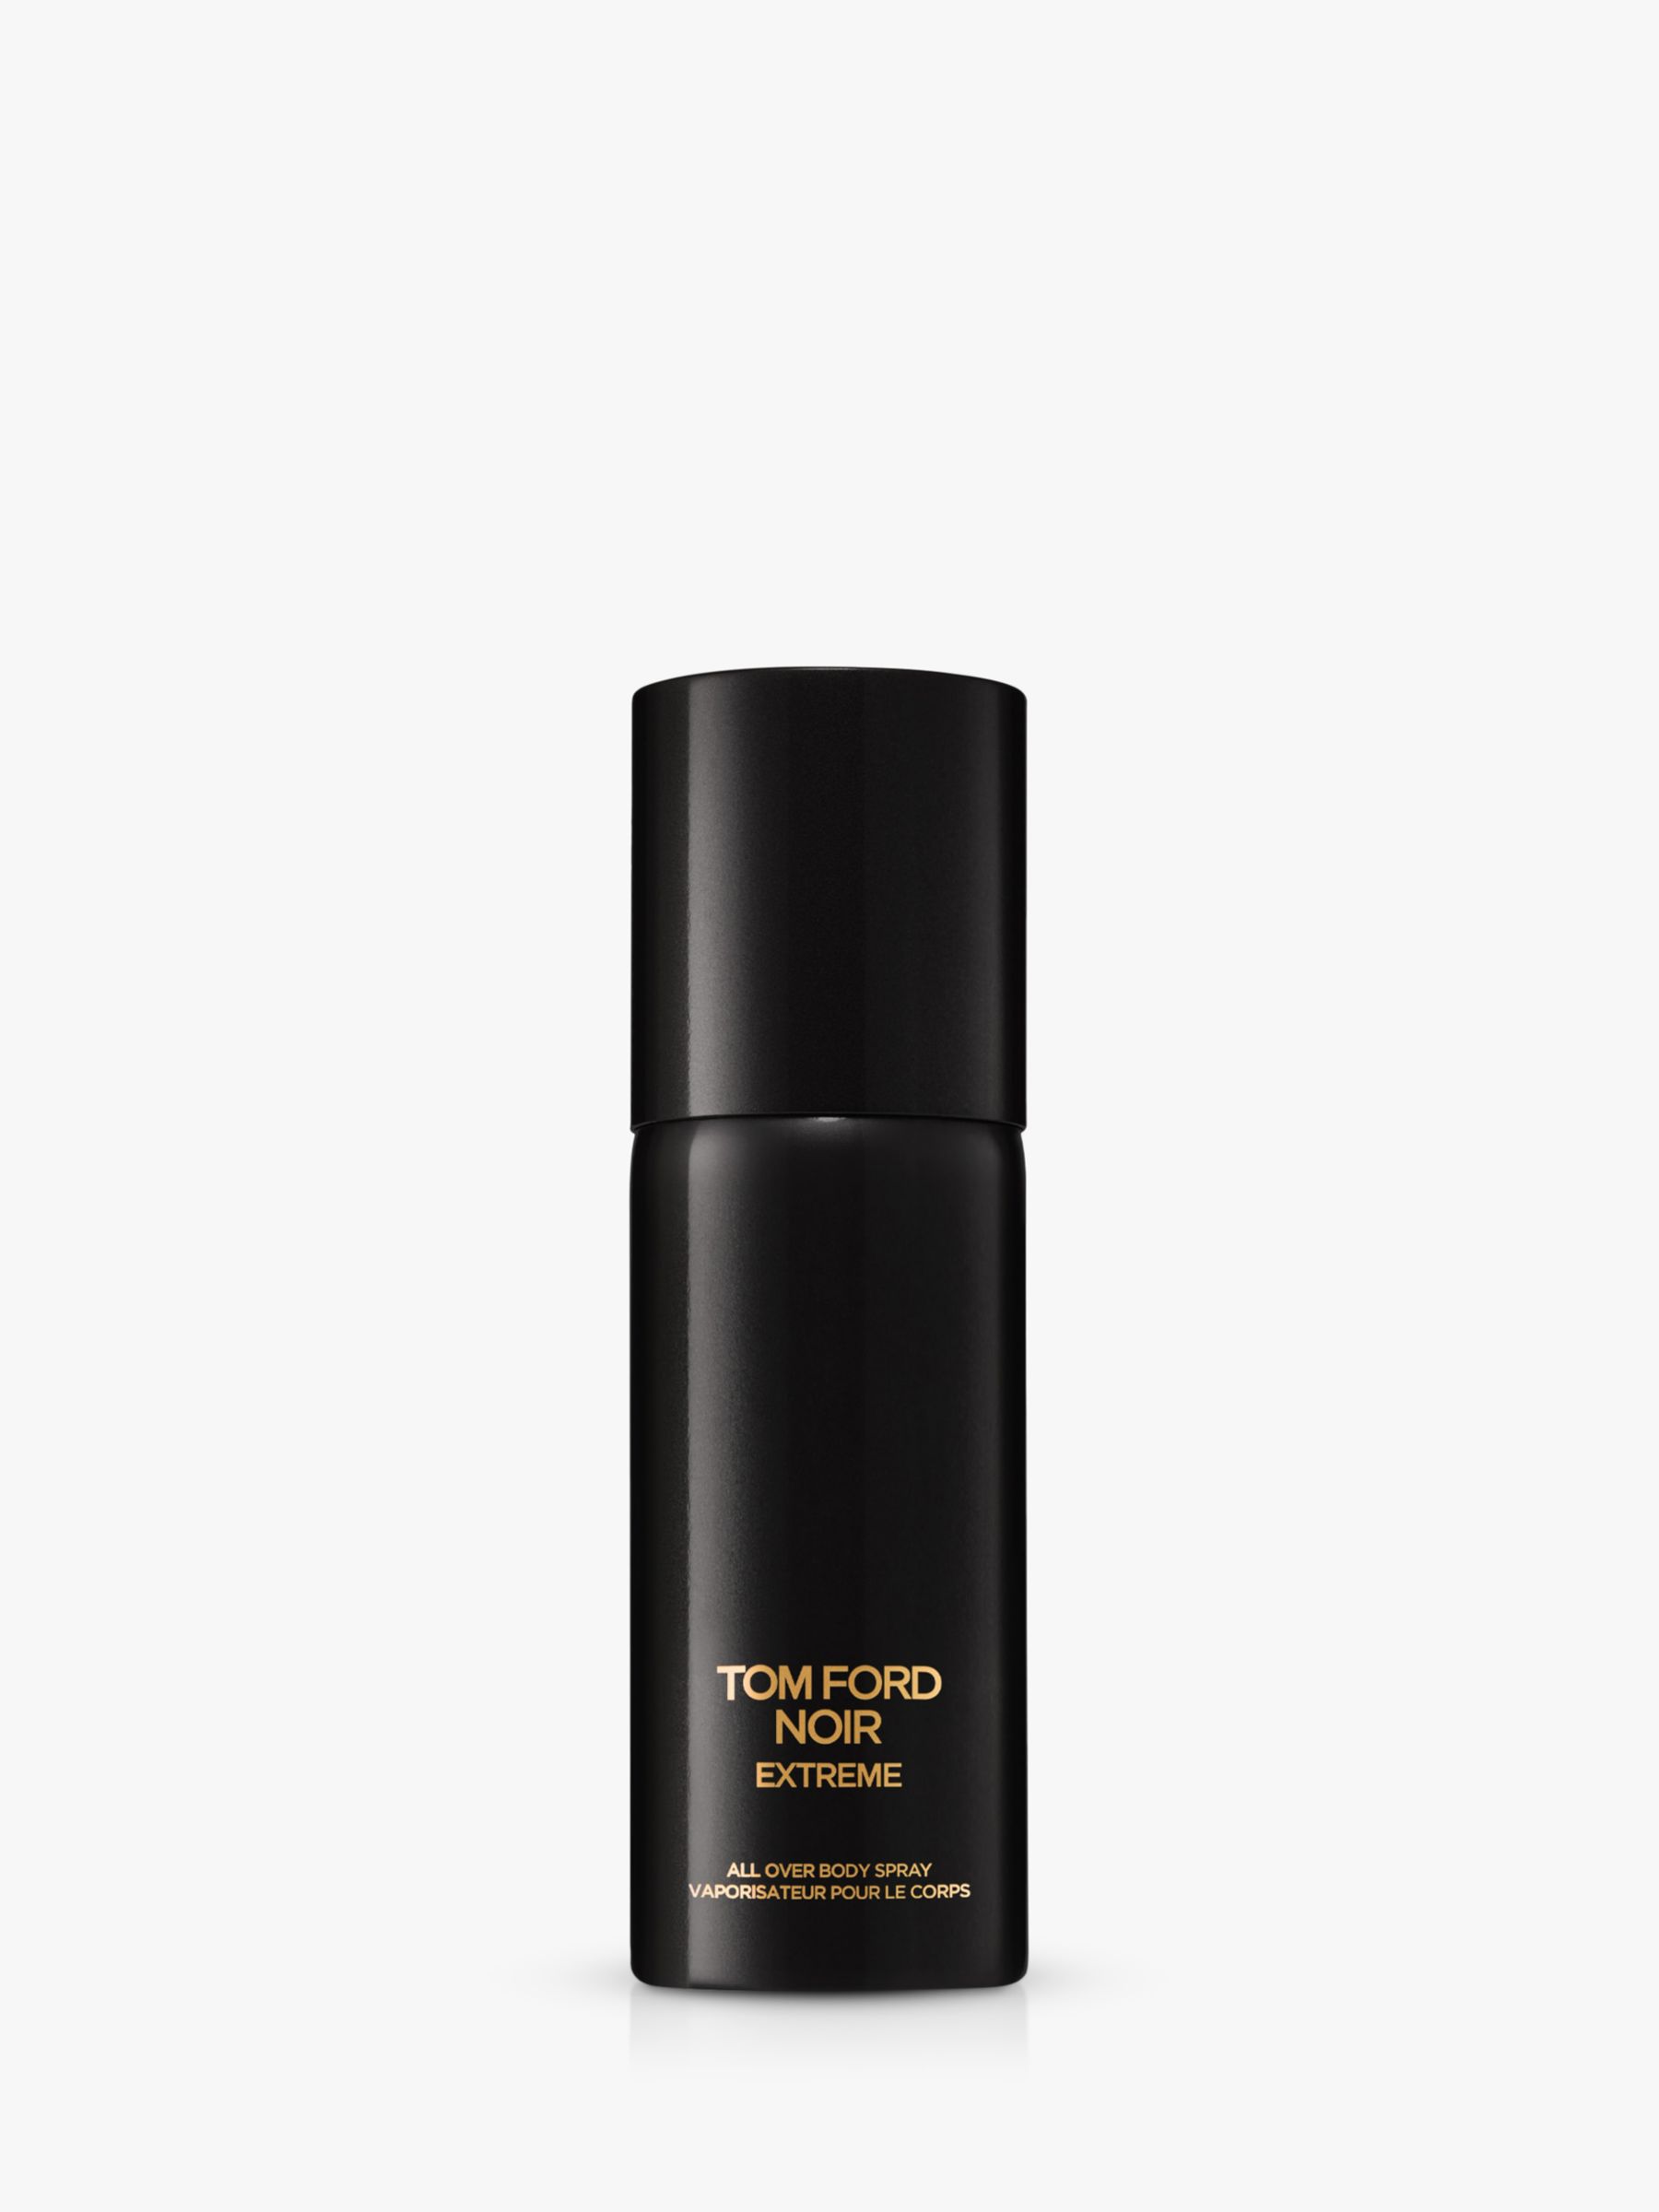 TOM FORD Noir Extreme All Over Body Spray, 150ml at John Lewis & Partners